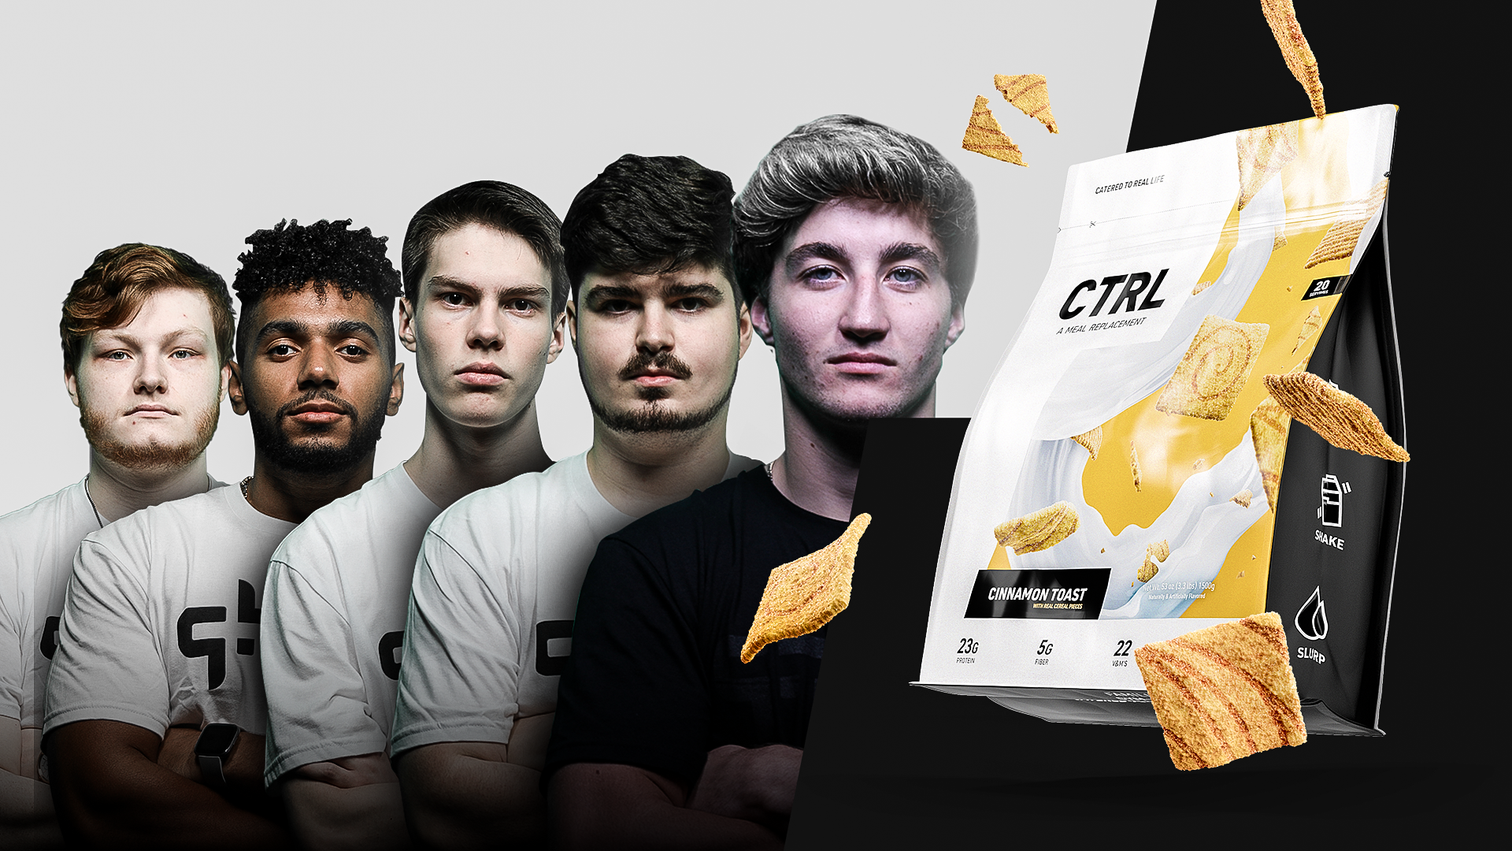 GHOST WELCOMES CTRL TO THE FAMILY